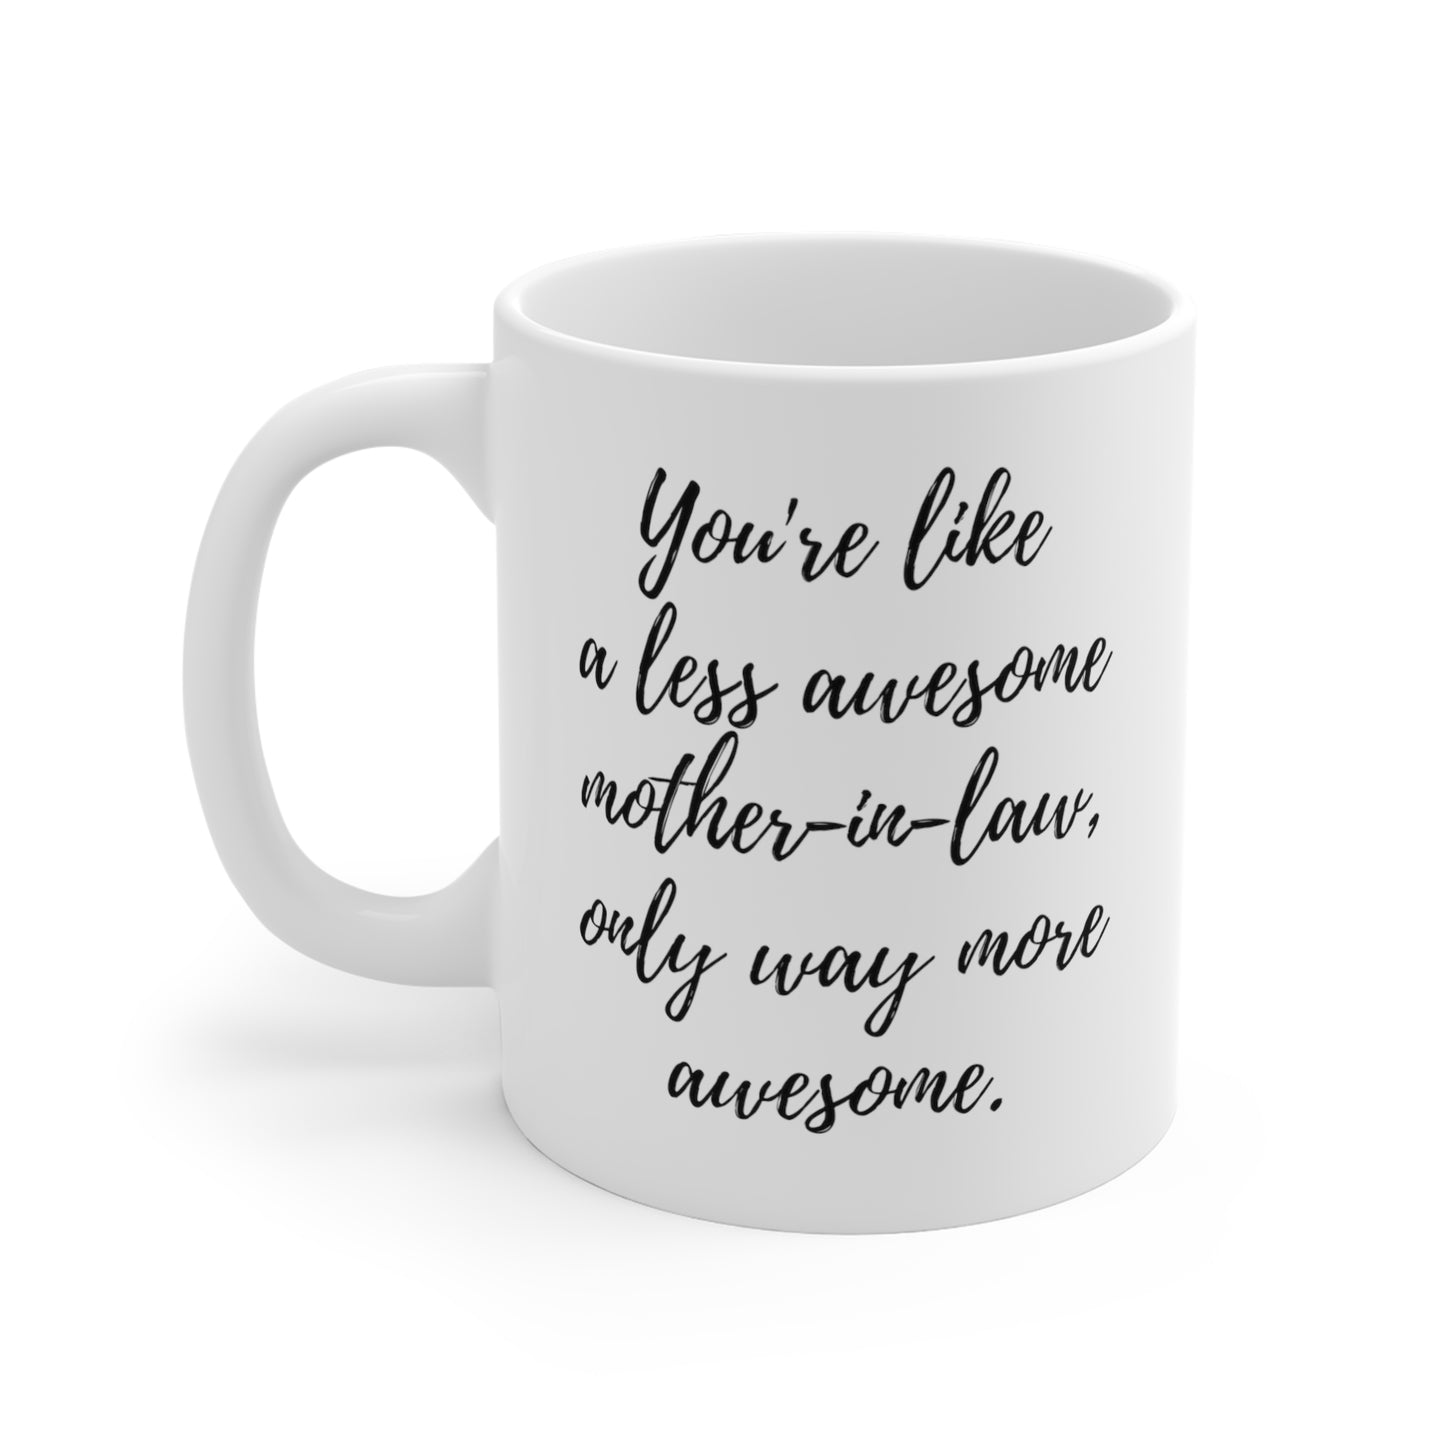 You're Like A Less Awesome Mother-in-Law, Only Way More Awesome | Funny, Snarky Gift | White Ceramic Mug, Script Font